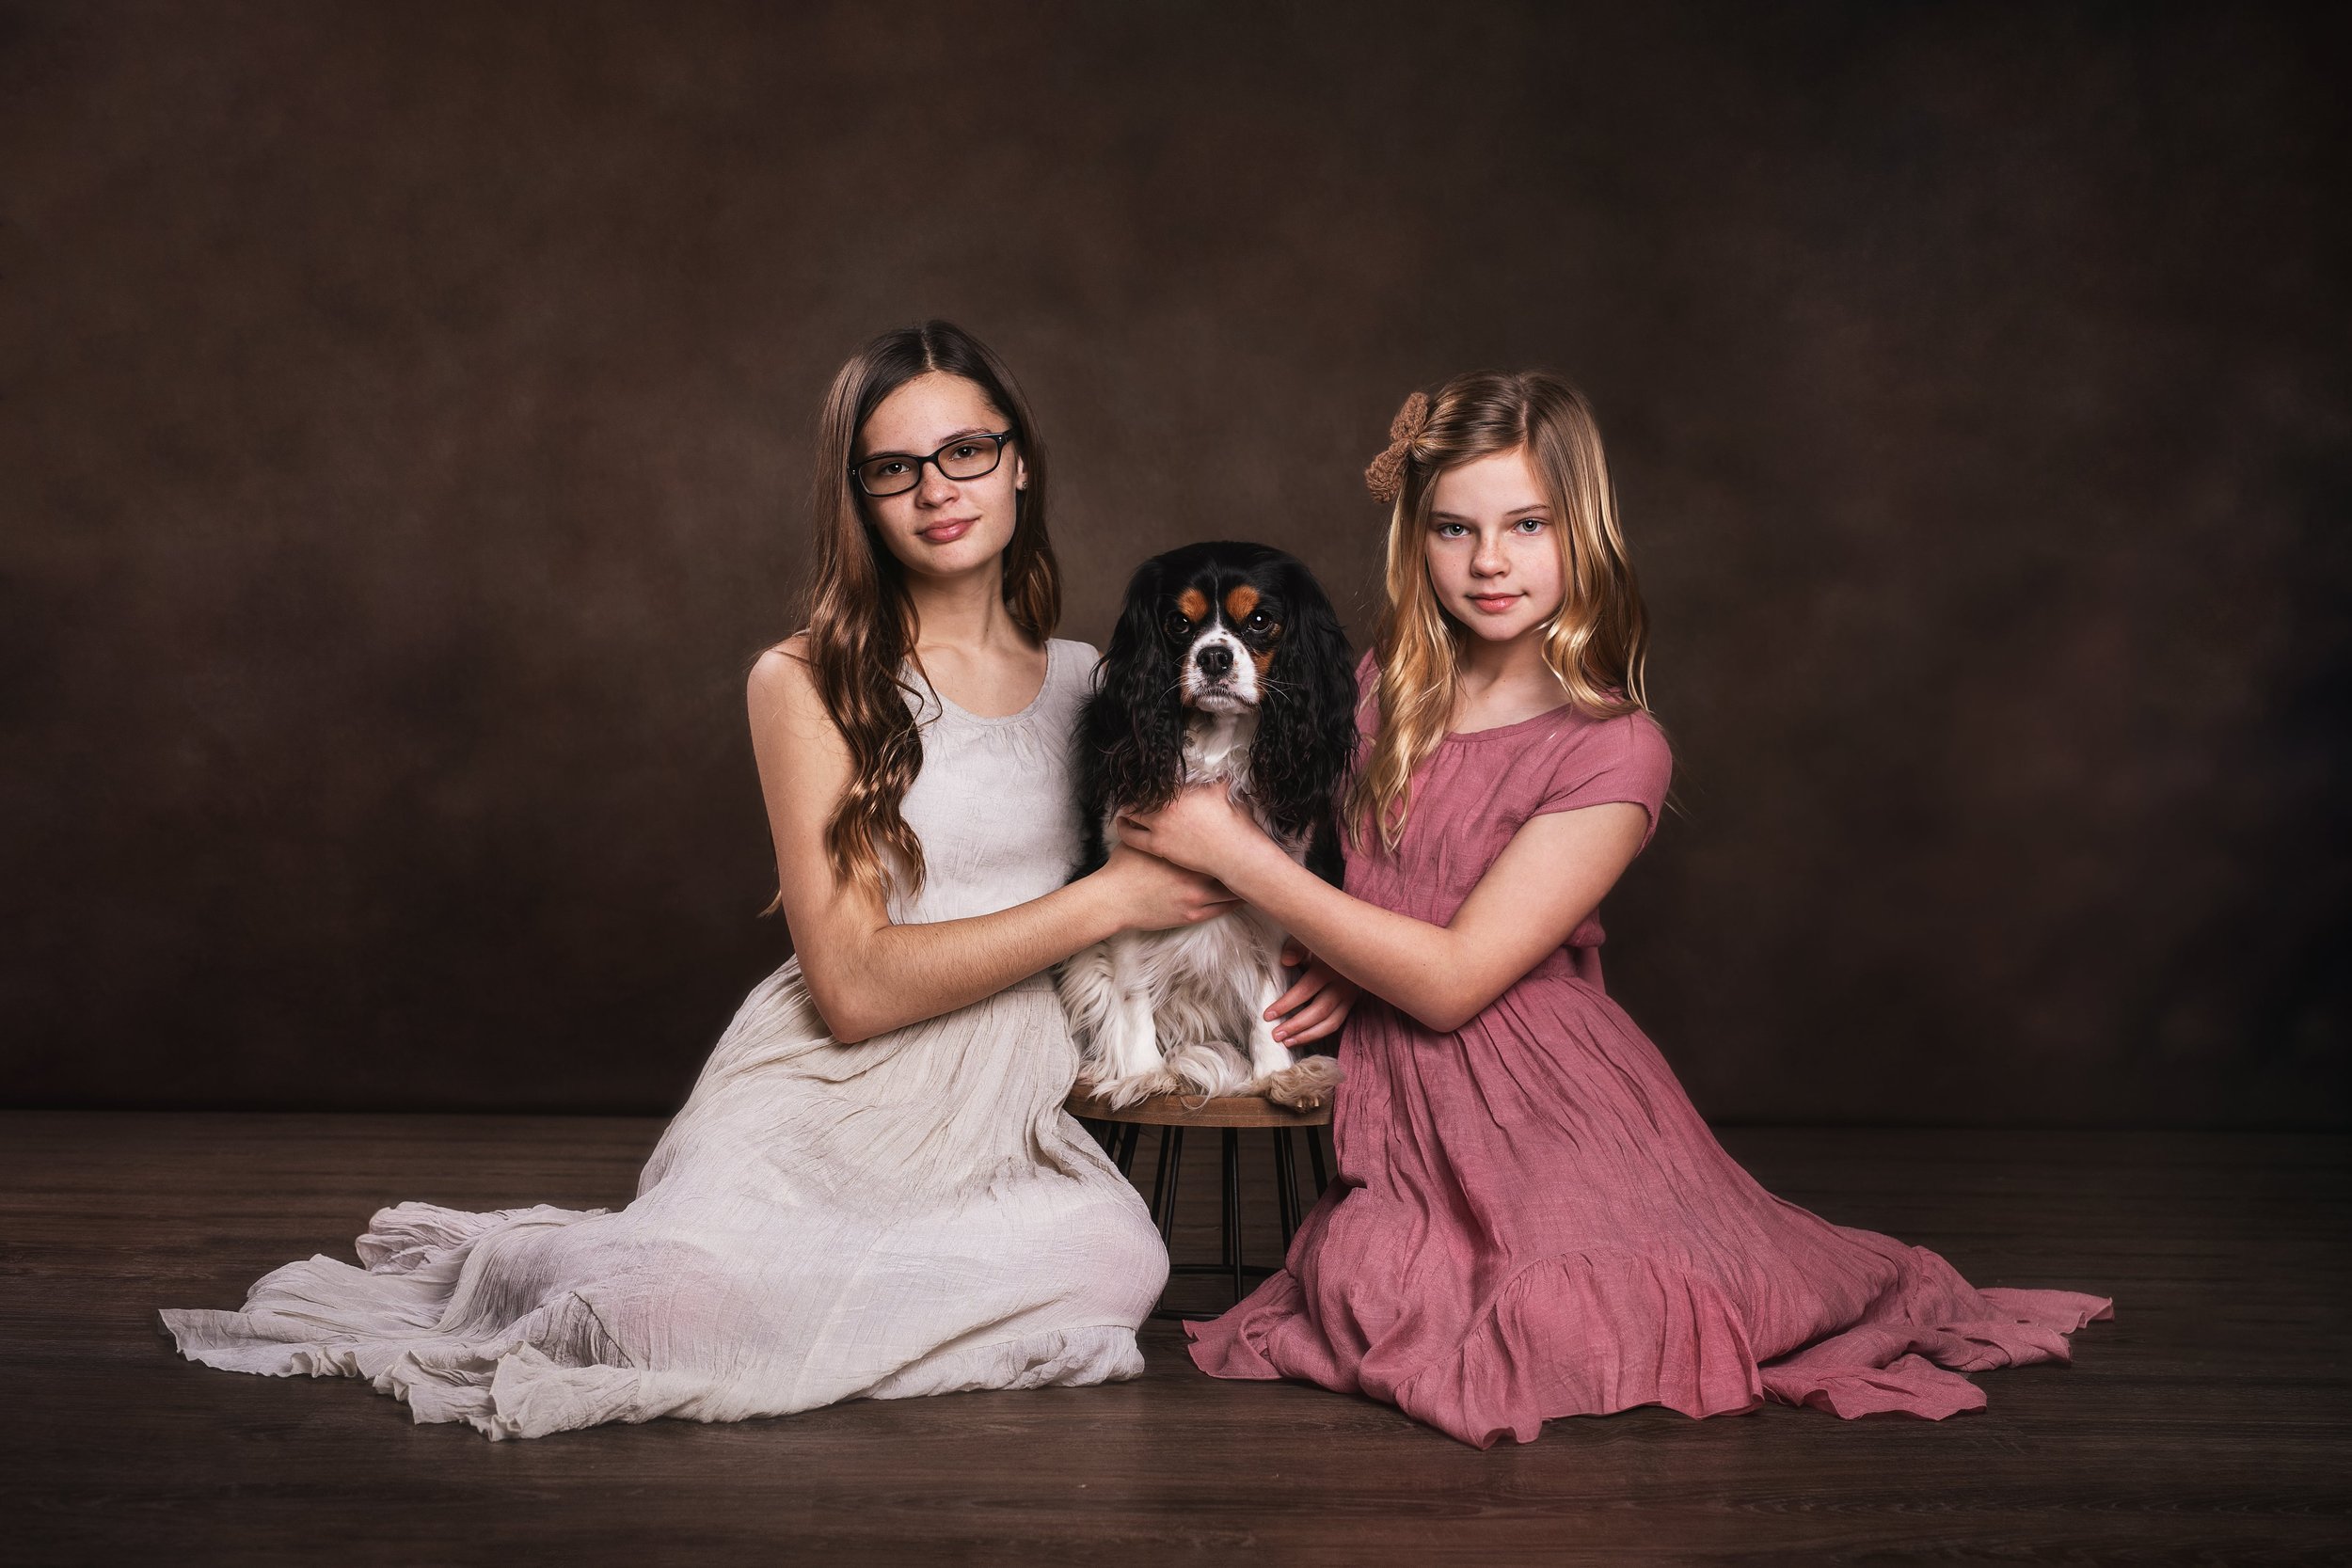 Angie Perisse - Portfolio - Looks that express the soul - Photography Session for Kids, Pets, Horses, Family and Studio in Vernon, Texas, USA.